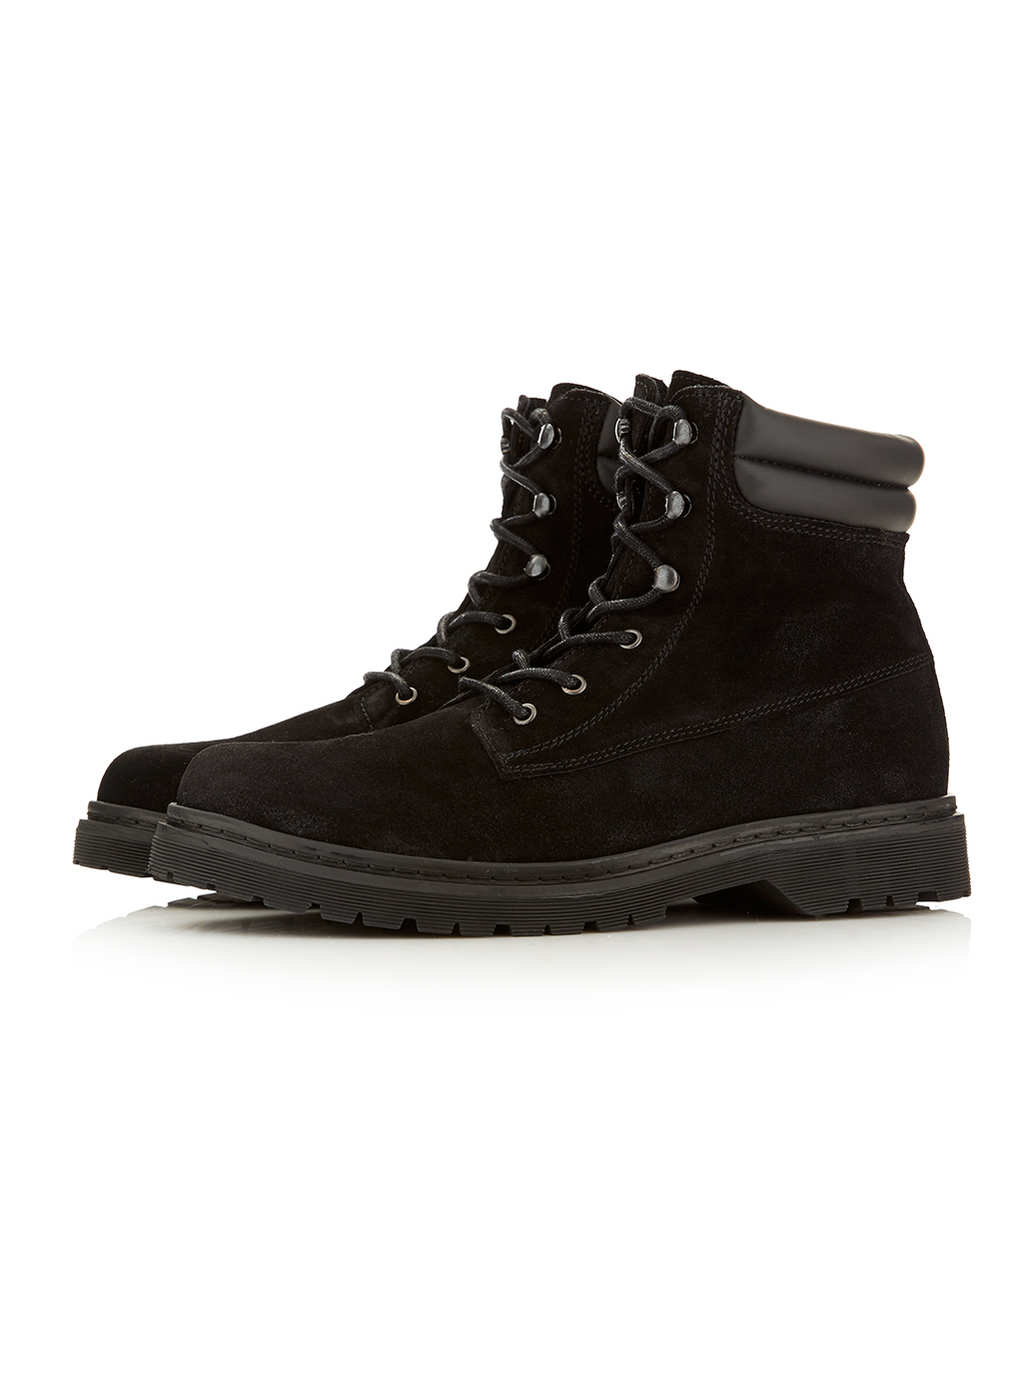 Topman Black Suede Heavy Cleated Boots in Black for Men | Lyst